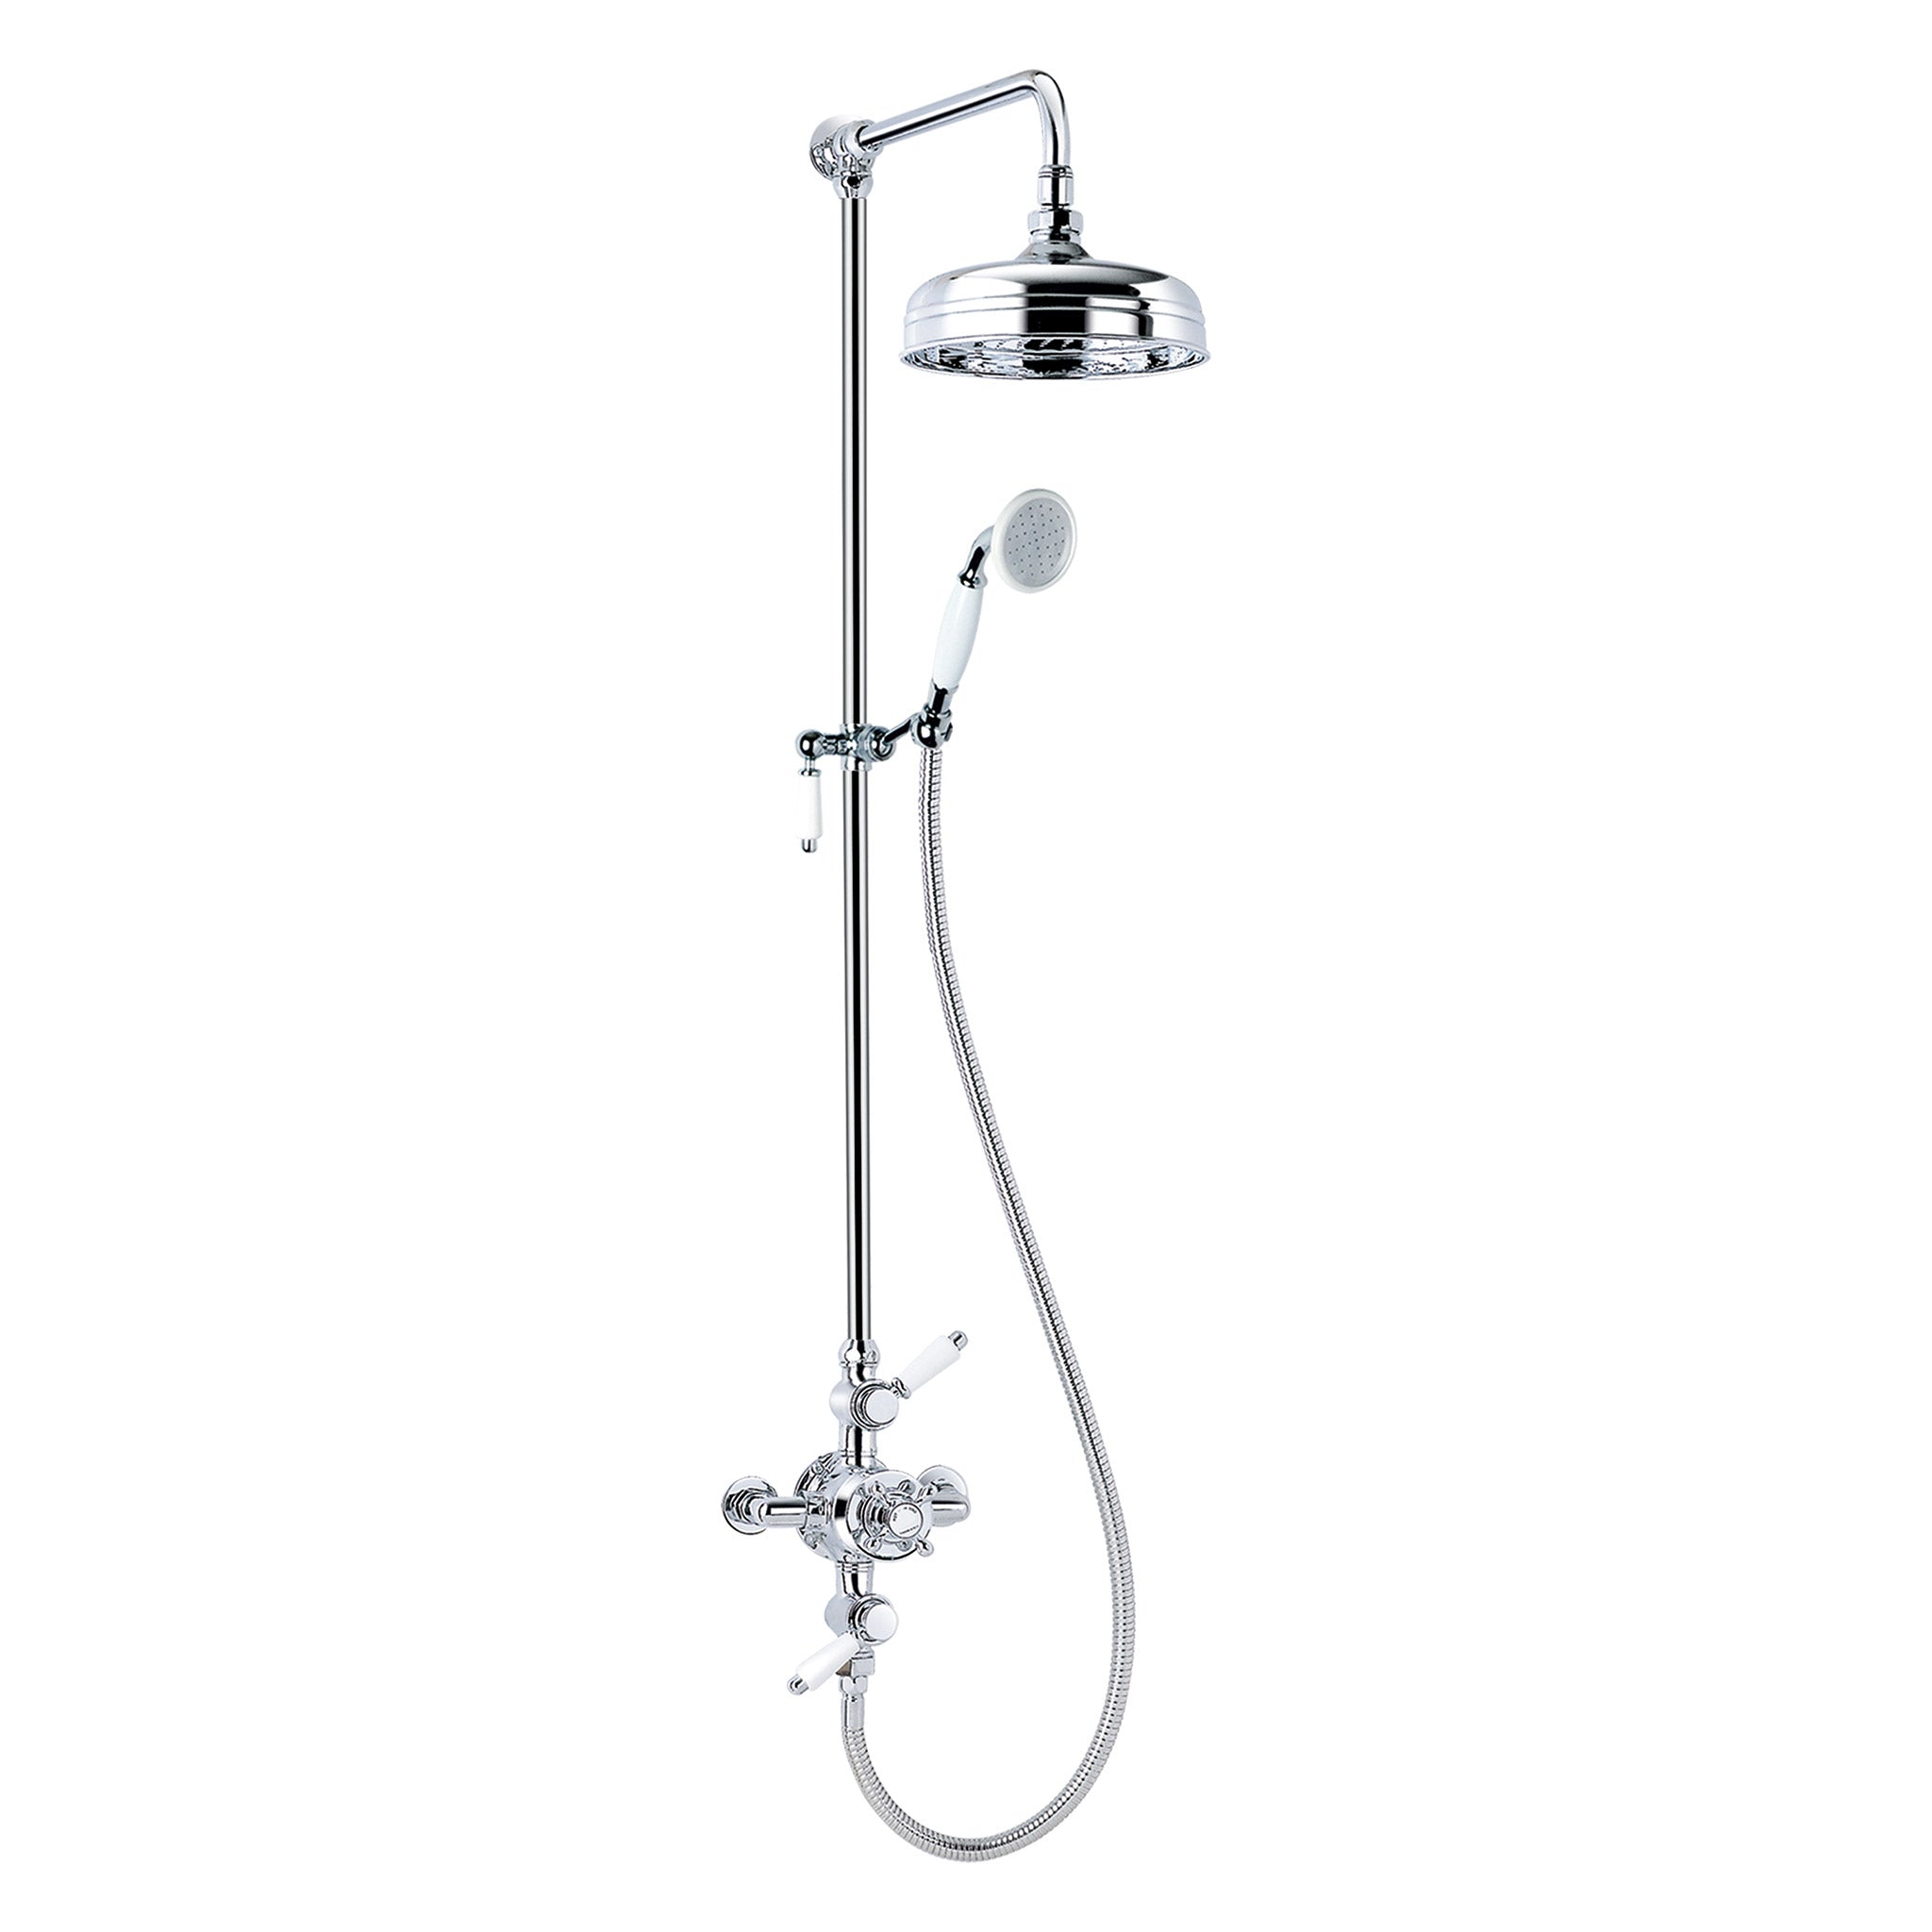 Union Exposed Shower System 3